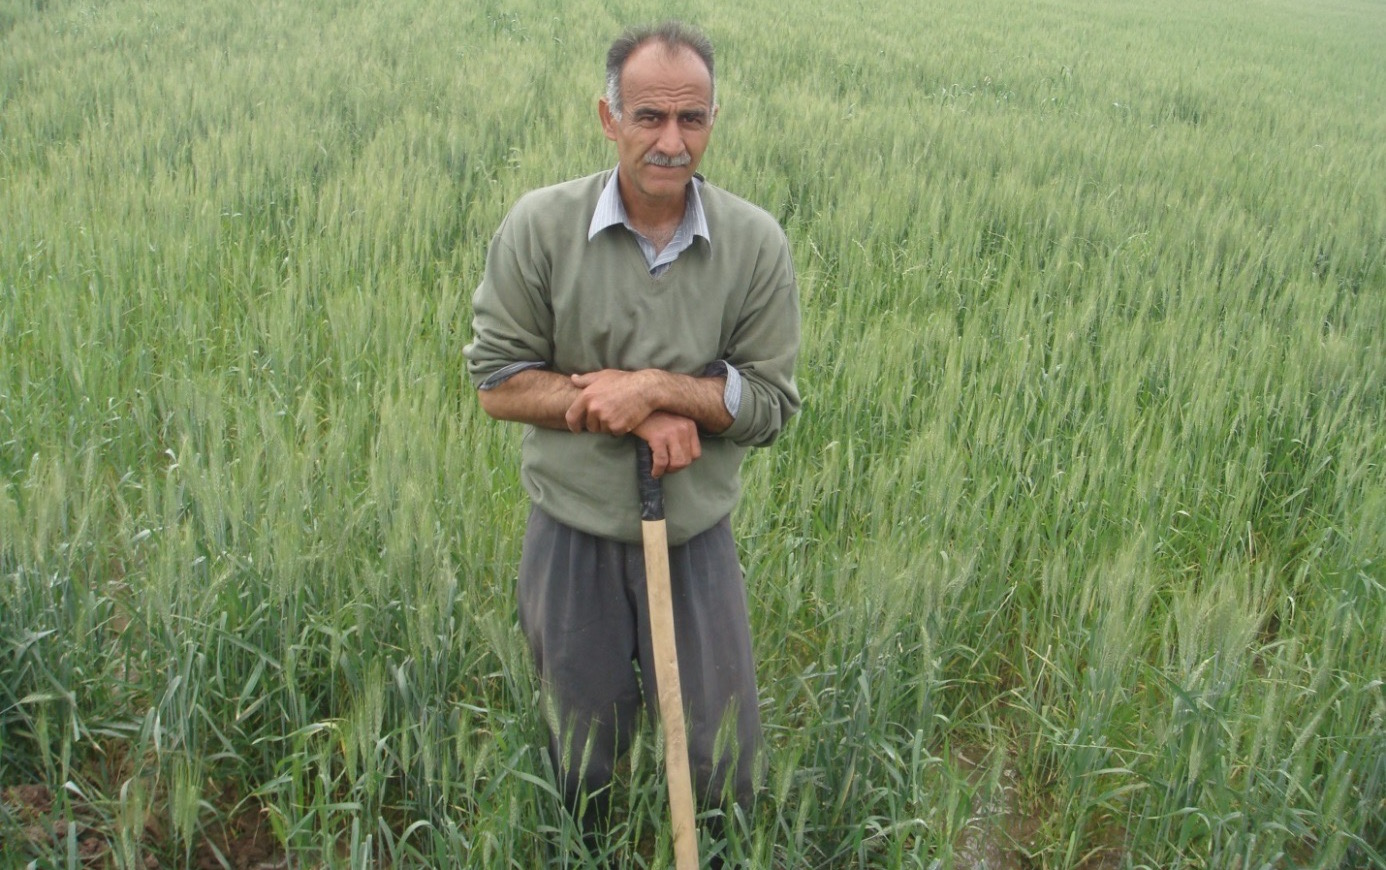 Water shortages and decade long drought are mobilizing Iran find new approaches to agriculture. Photo: M.E. Asadi